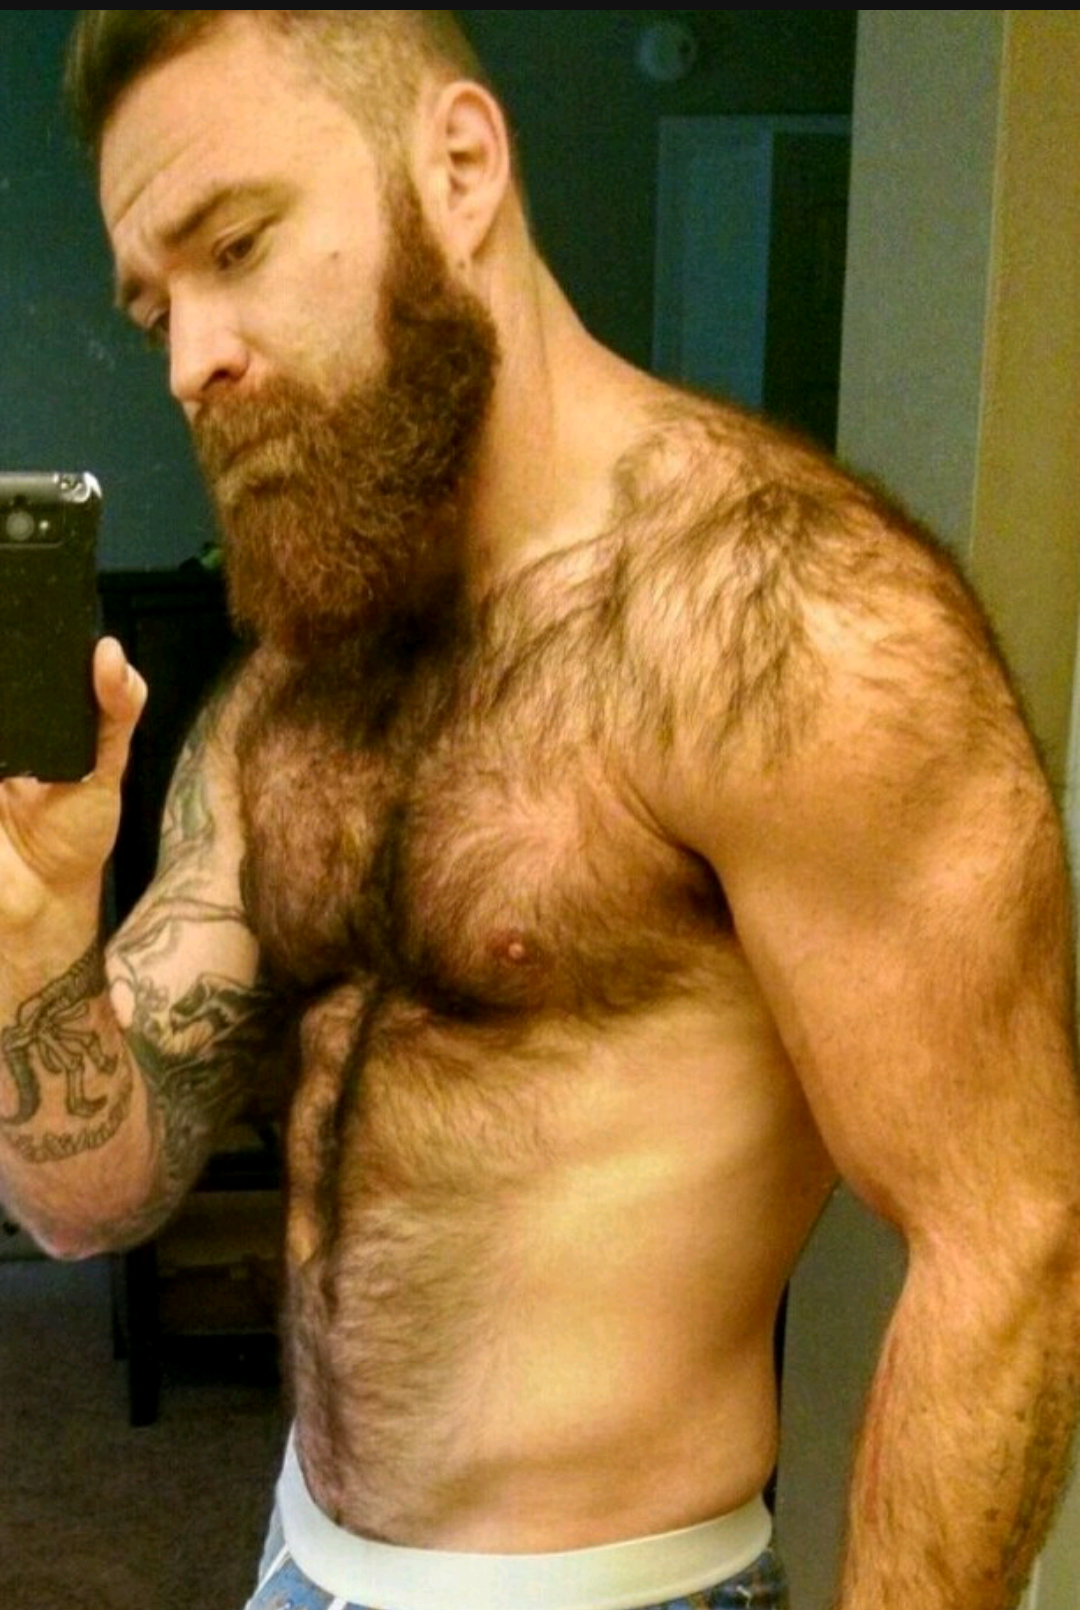 Photo by Smitty with the username @Resol702,  December 14, 2019 at 12:07 AM. The post is about the topic Gay Hairy Men